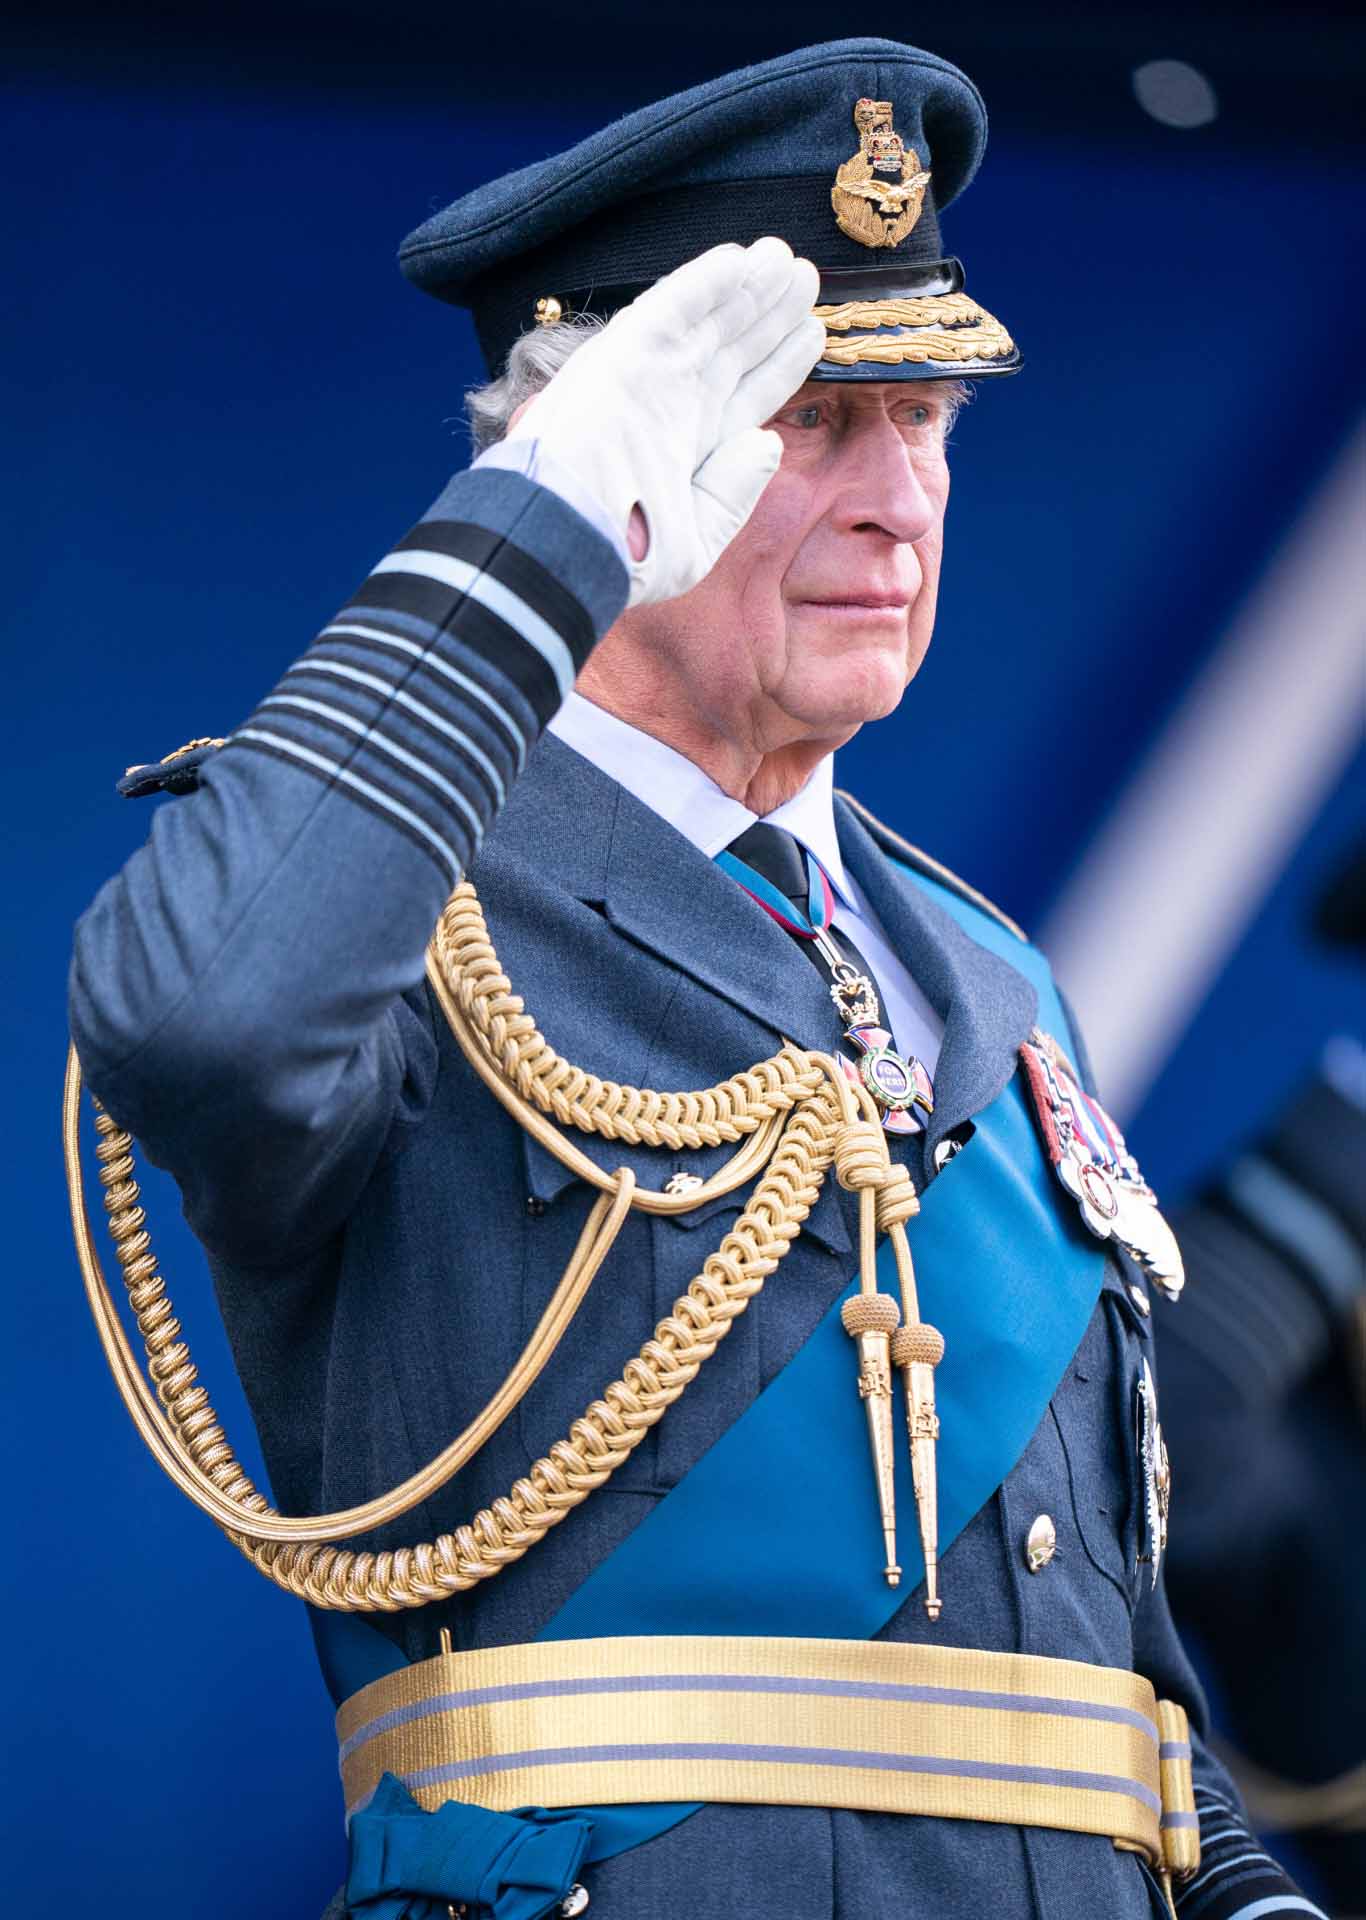 Prince Charles of Wales attends a parade at RAFC Cranwell in Sleaford